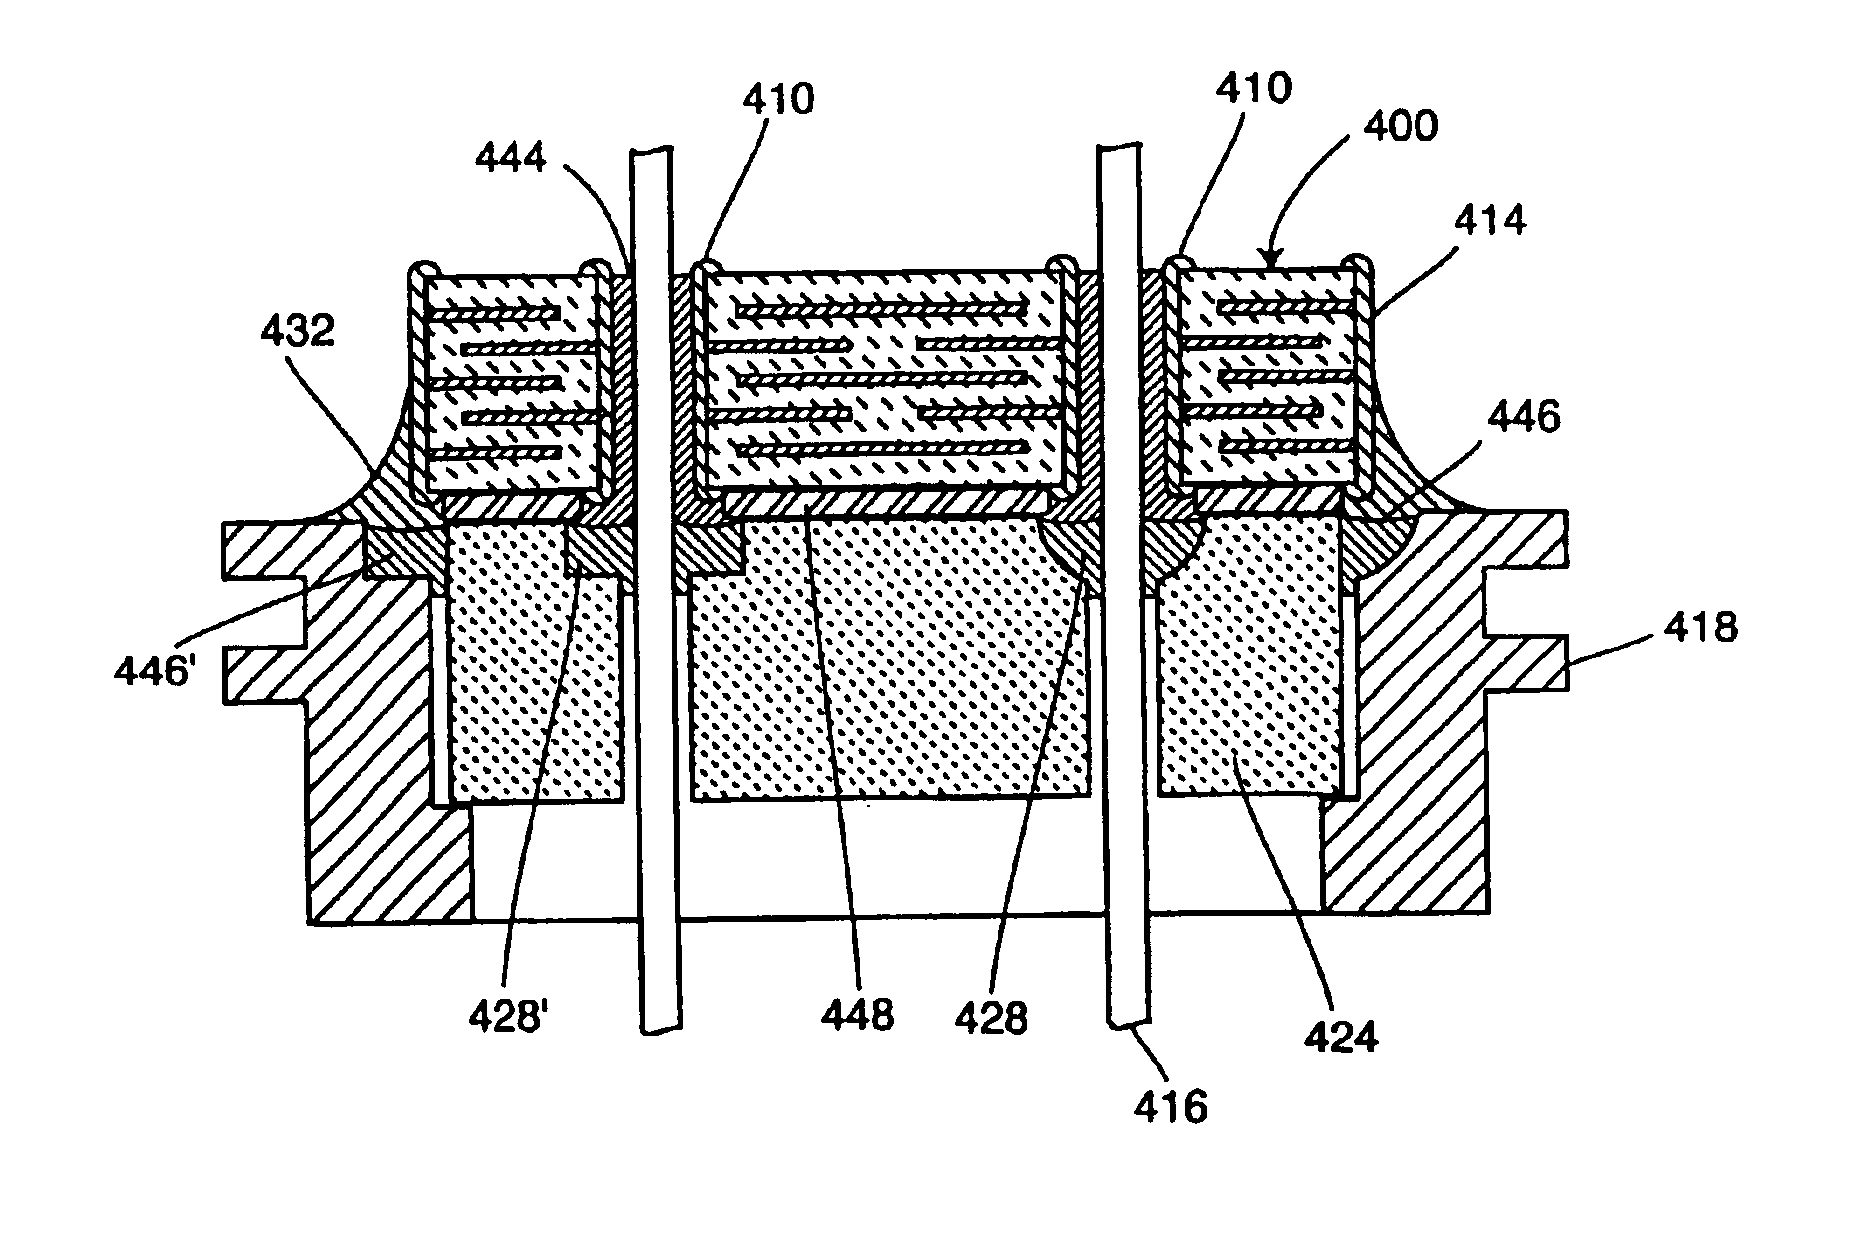 EMI feedthrough filter terminal assembly utilizing hermetic seal for electrical attachment between lead wires and capacitor